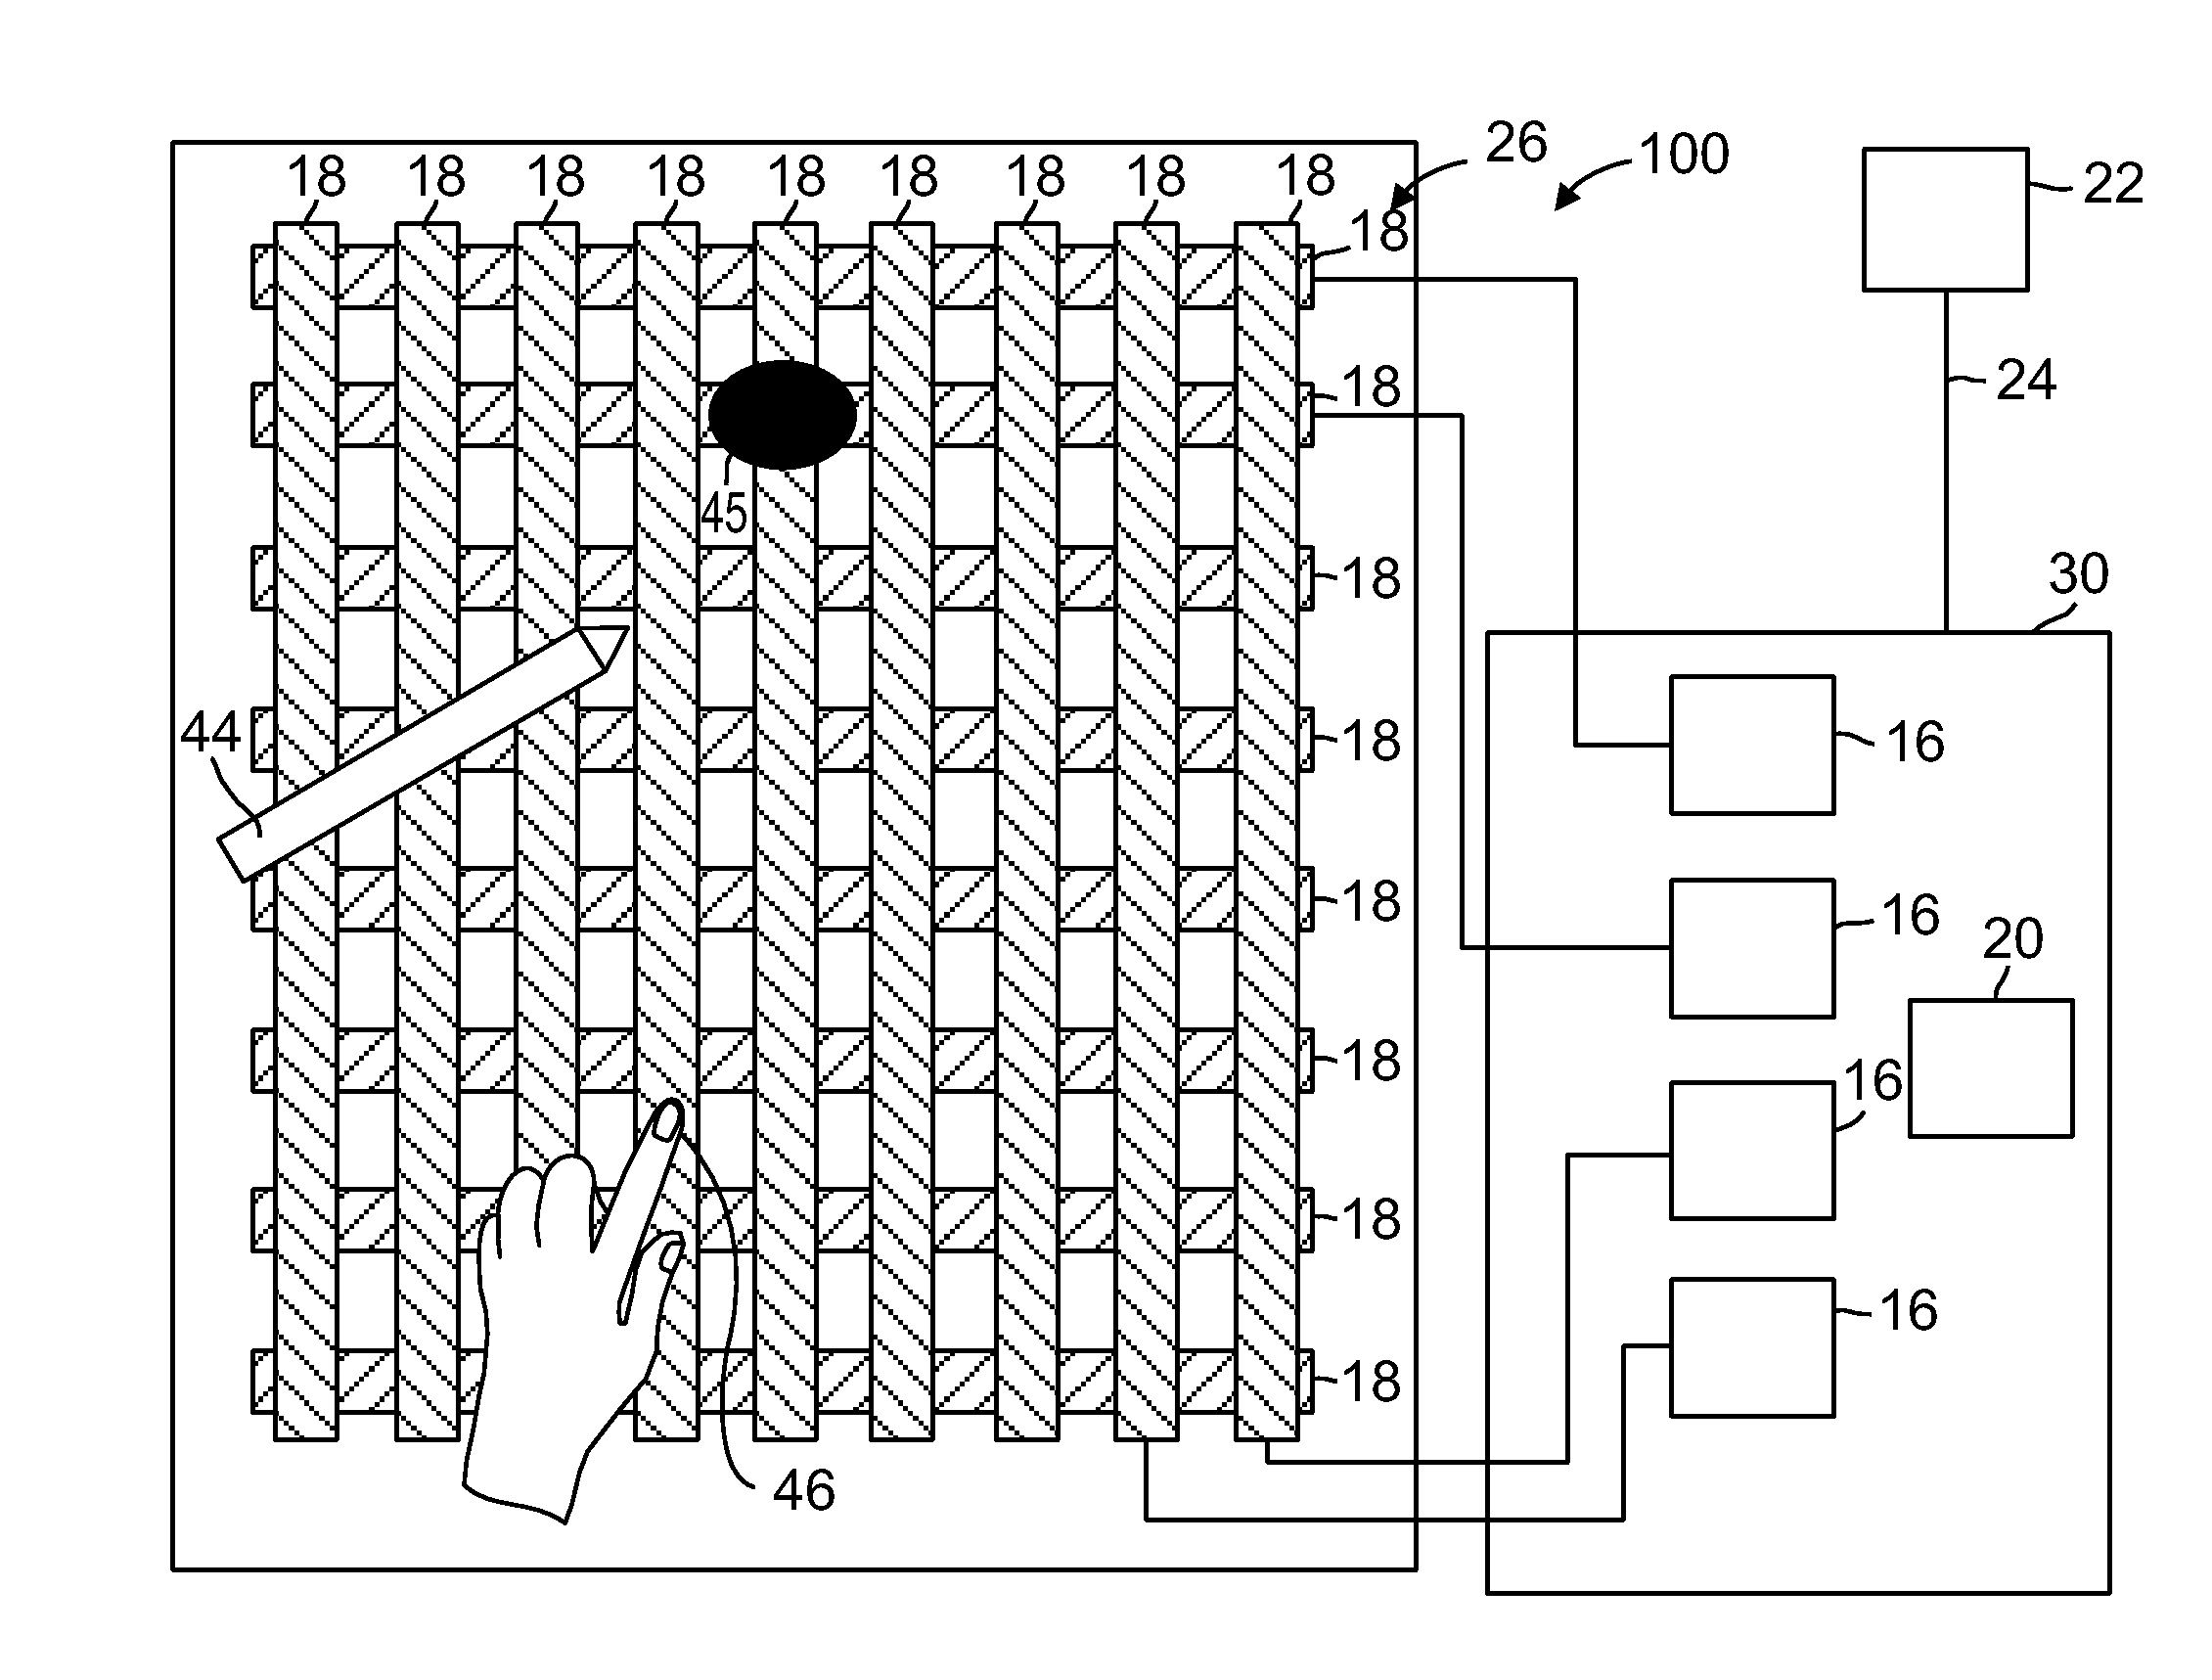 Method for identifying palm input to a digitizer